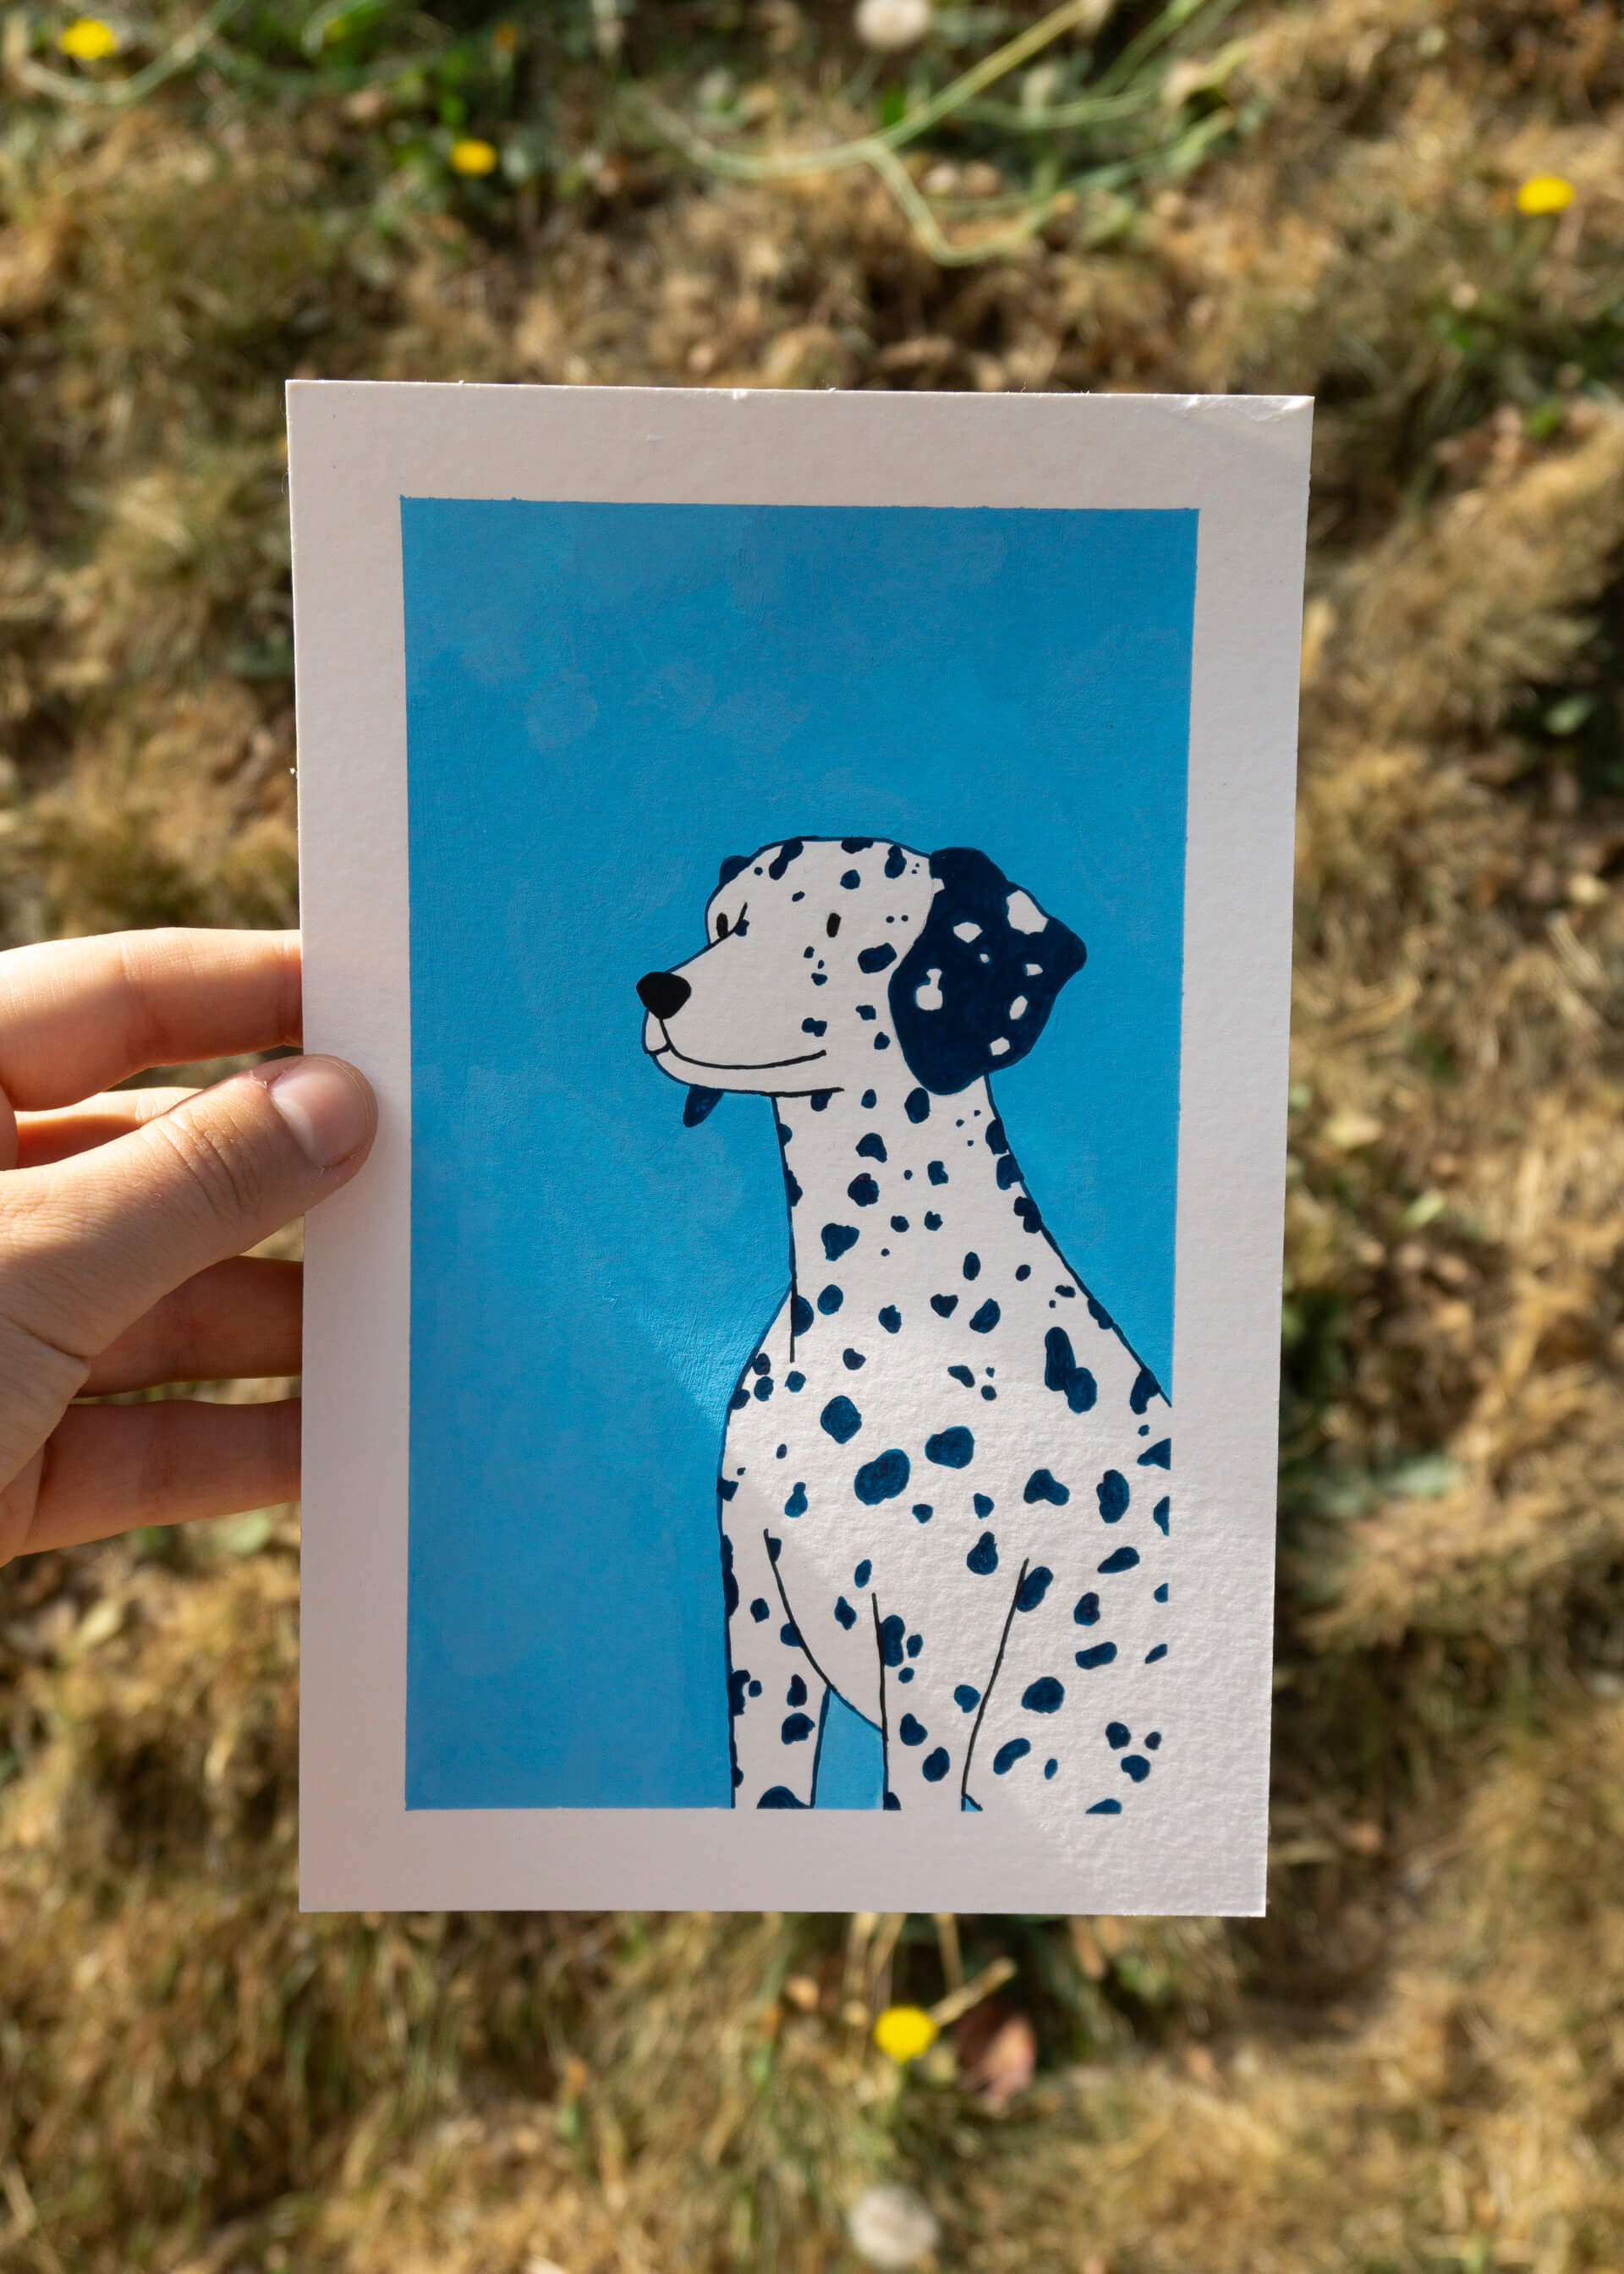 A hand holds up a gouache painting of a dalmatian on a blue background